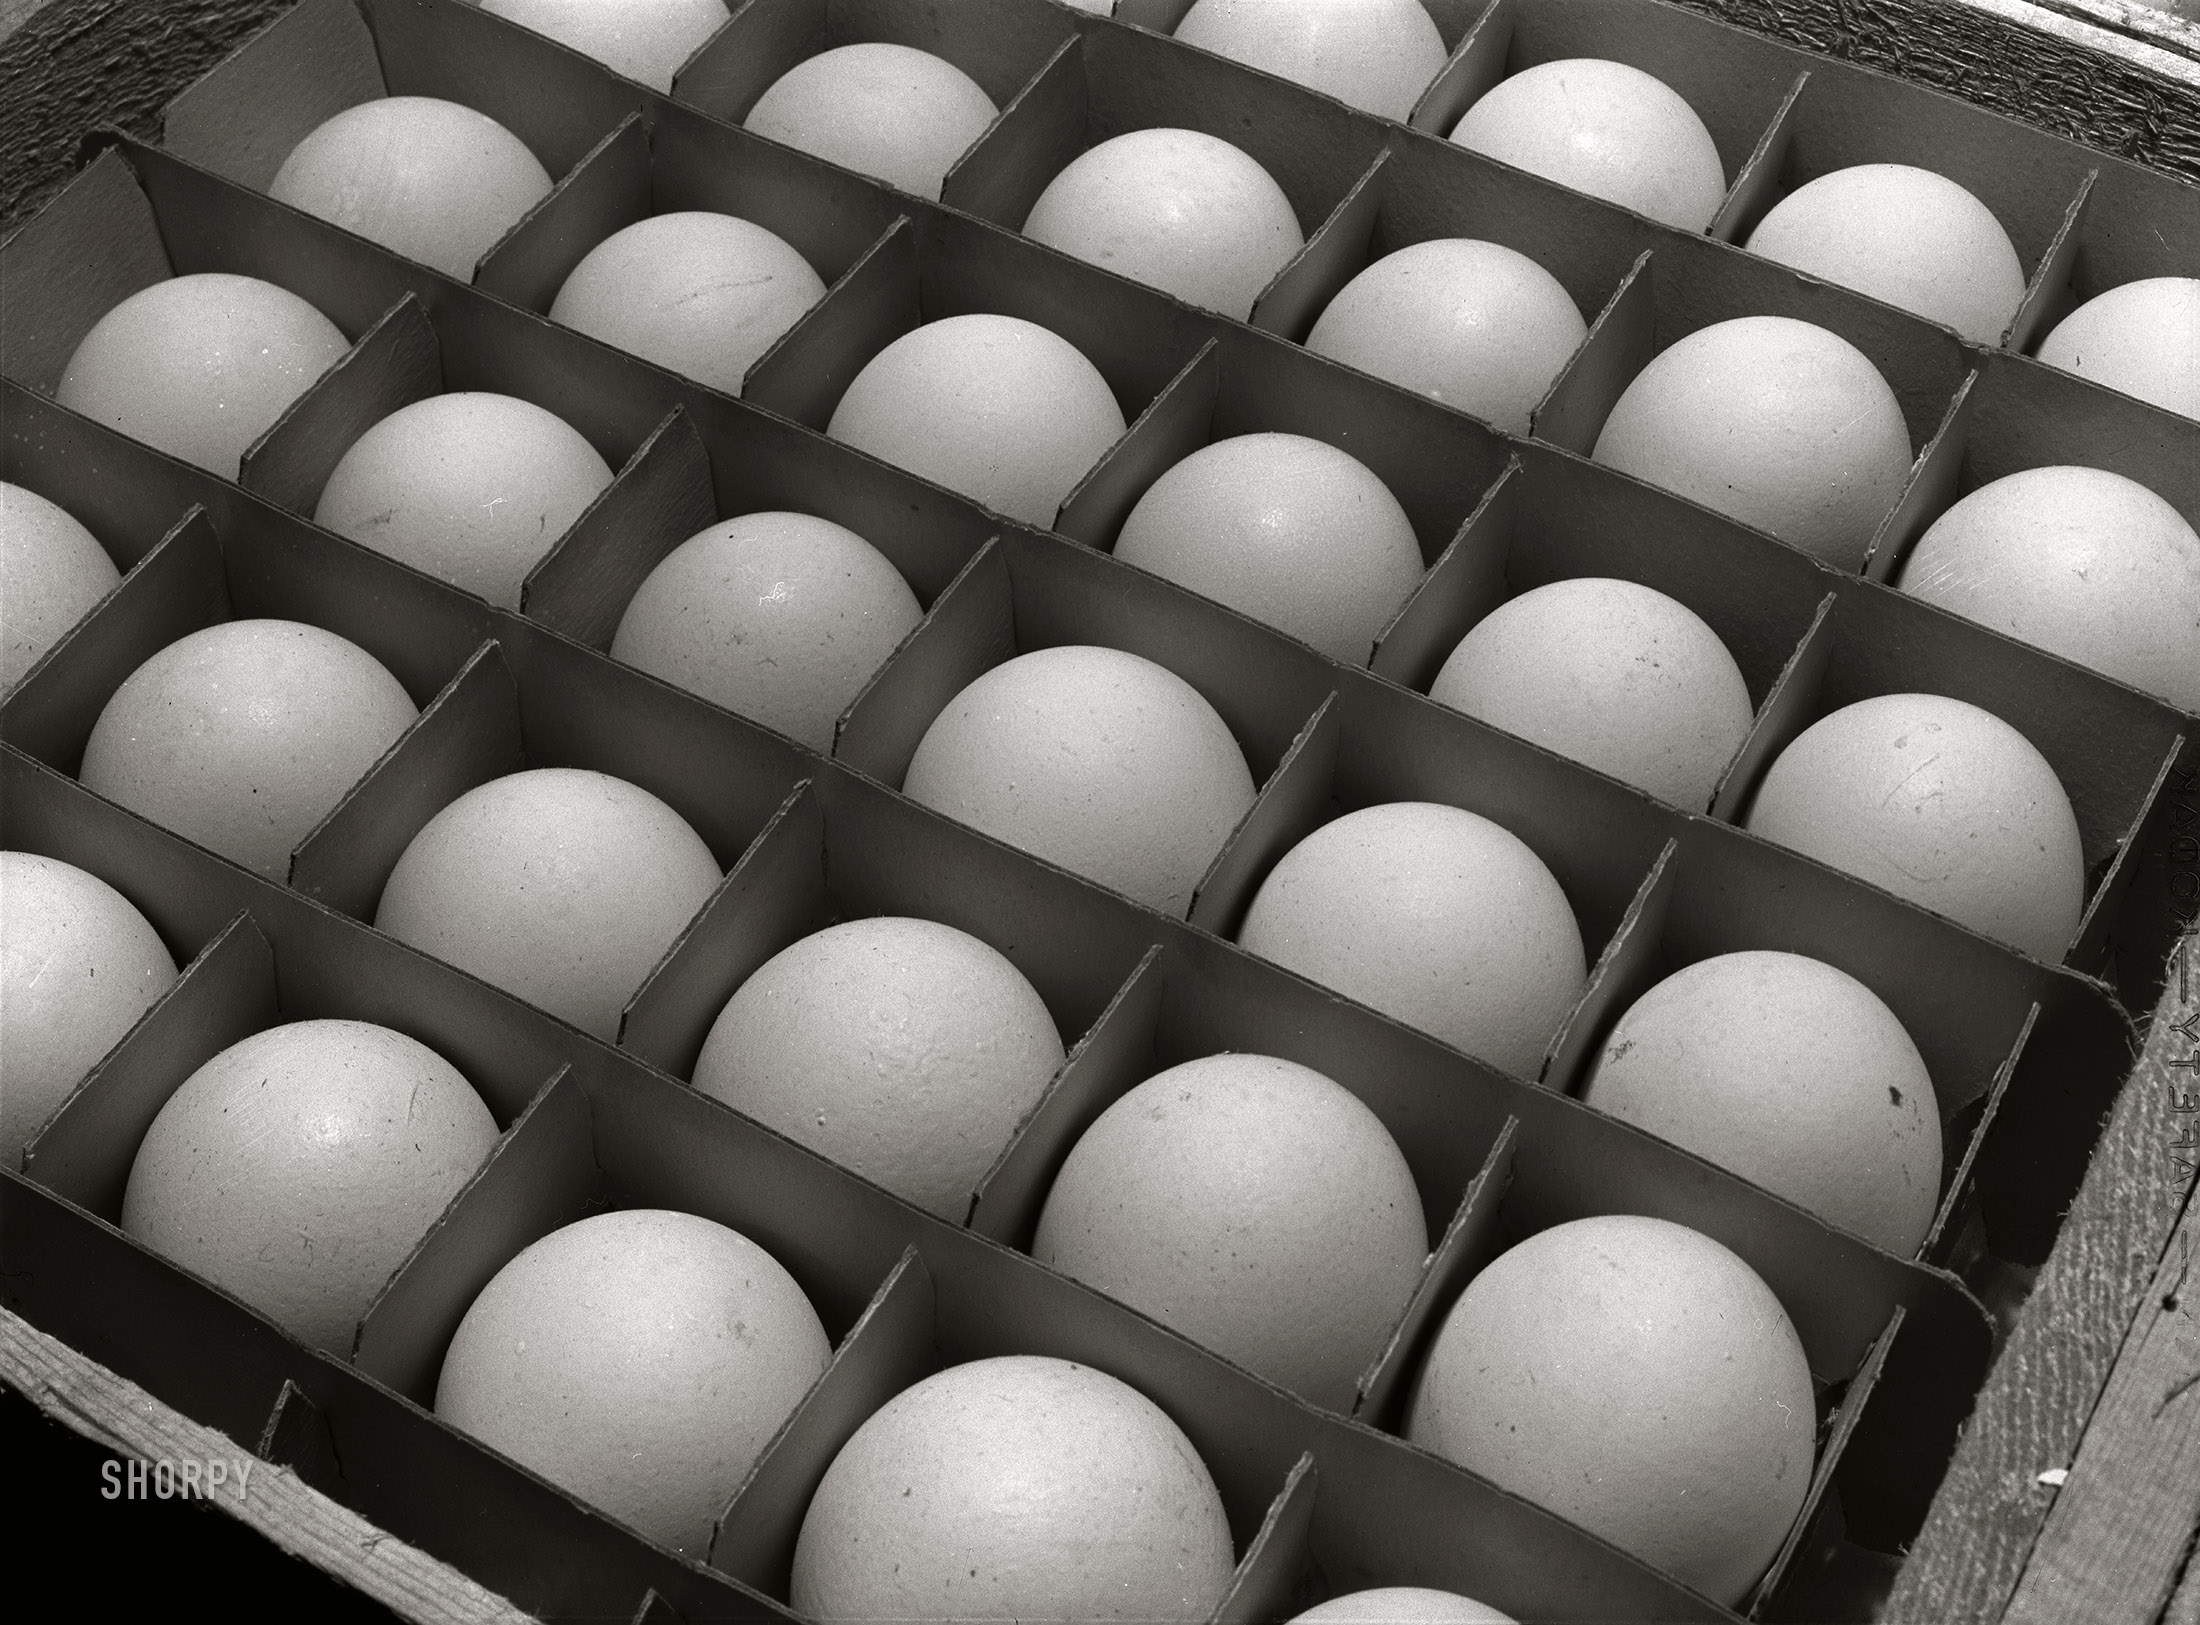 January 1942. "Sonoma County, California. Eggs. (Poultry raising exclusively for egg production on a scientific basis)." Photo by Russell Lee for the Office of War Information. View full size.